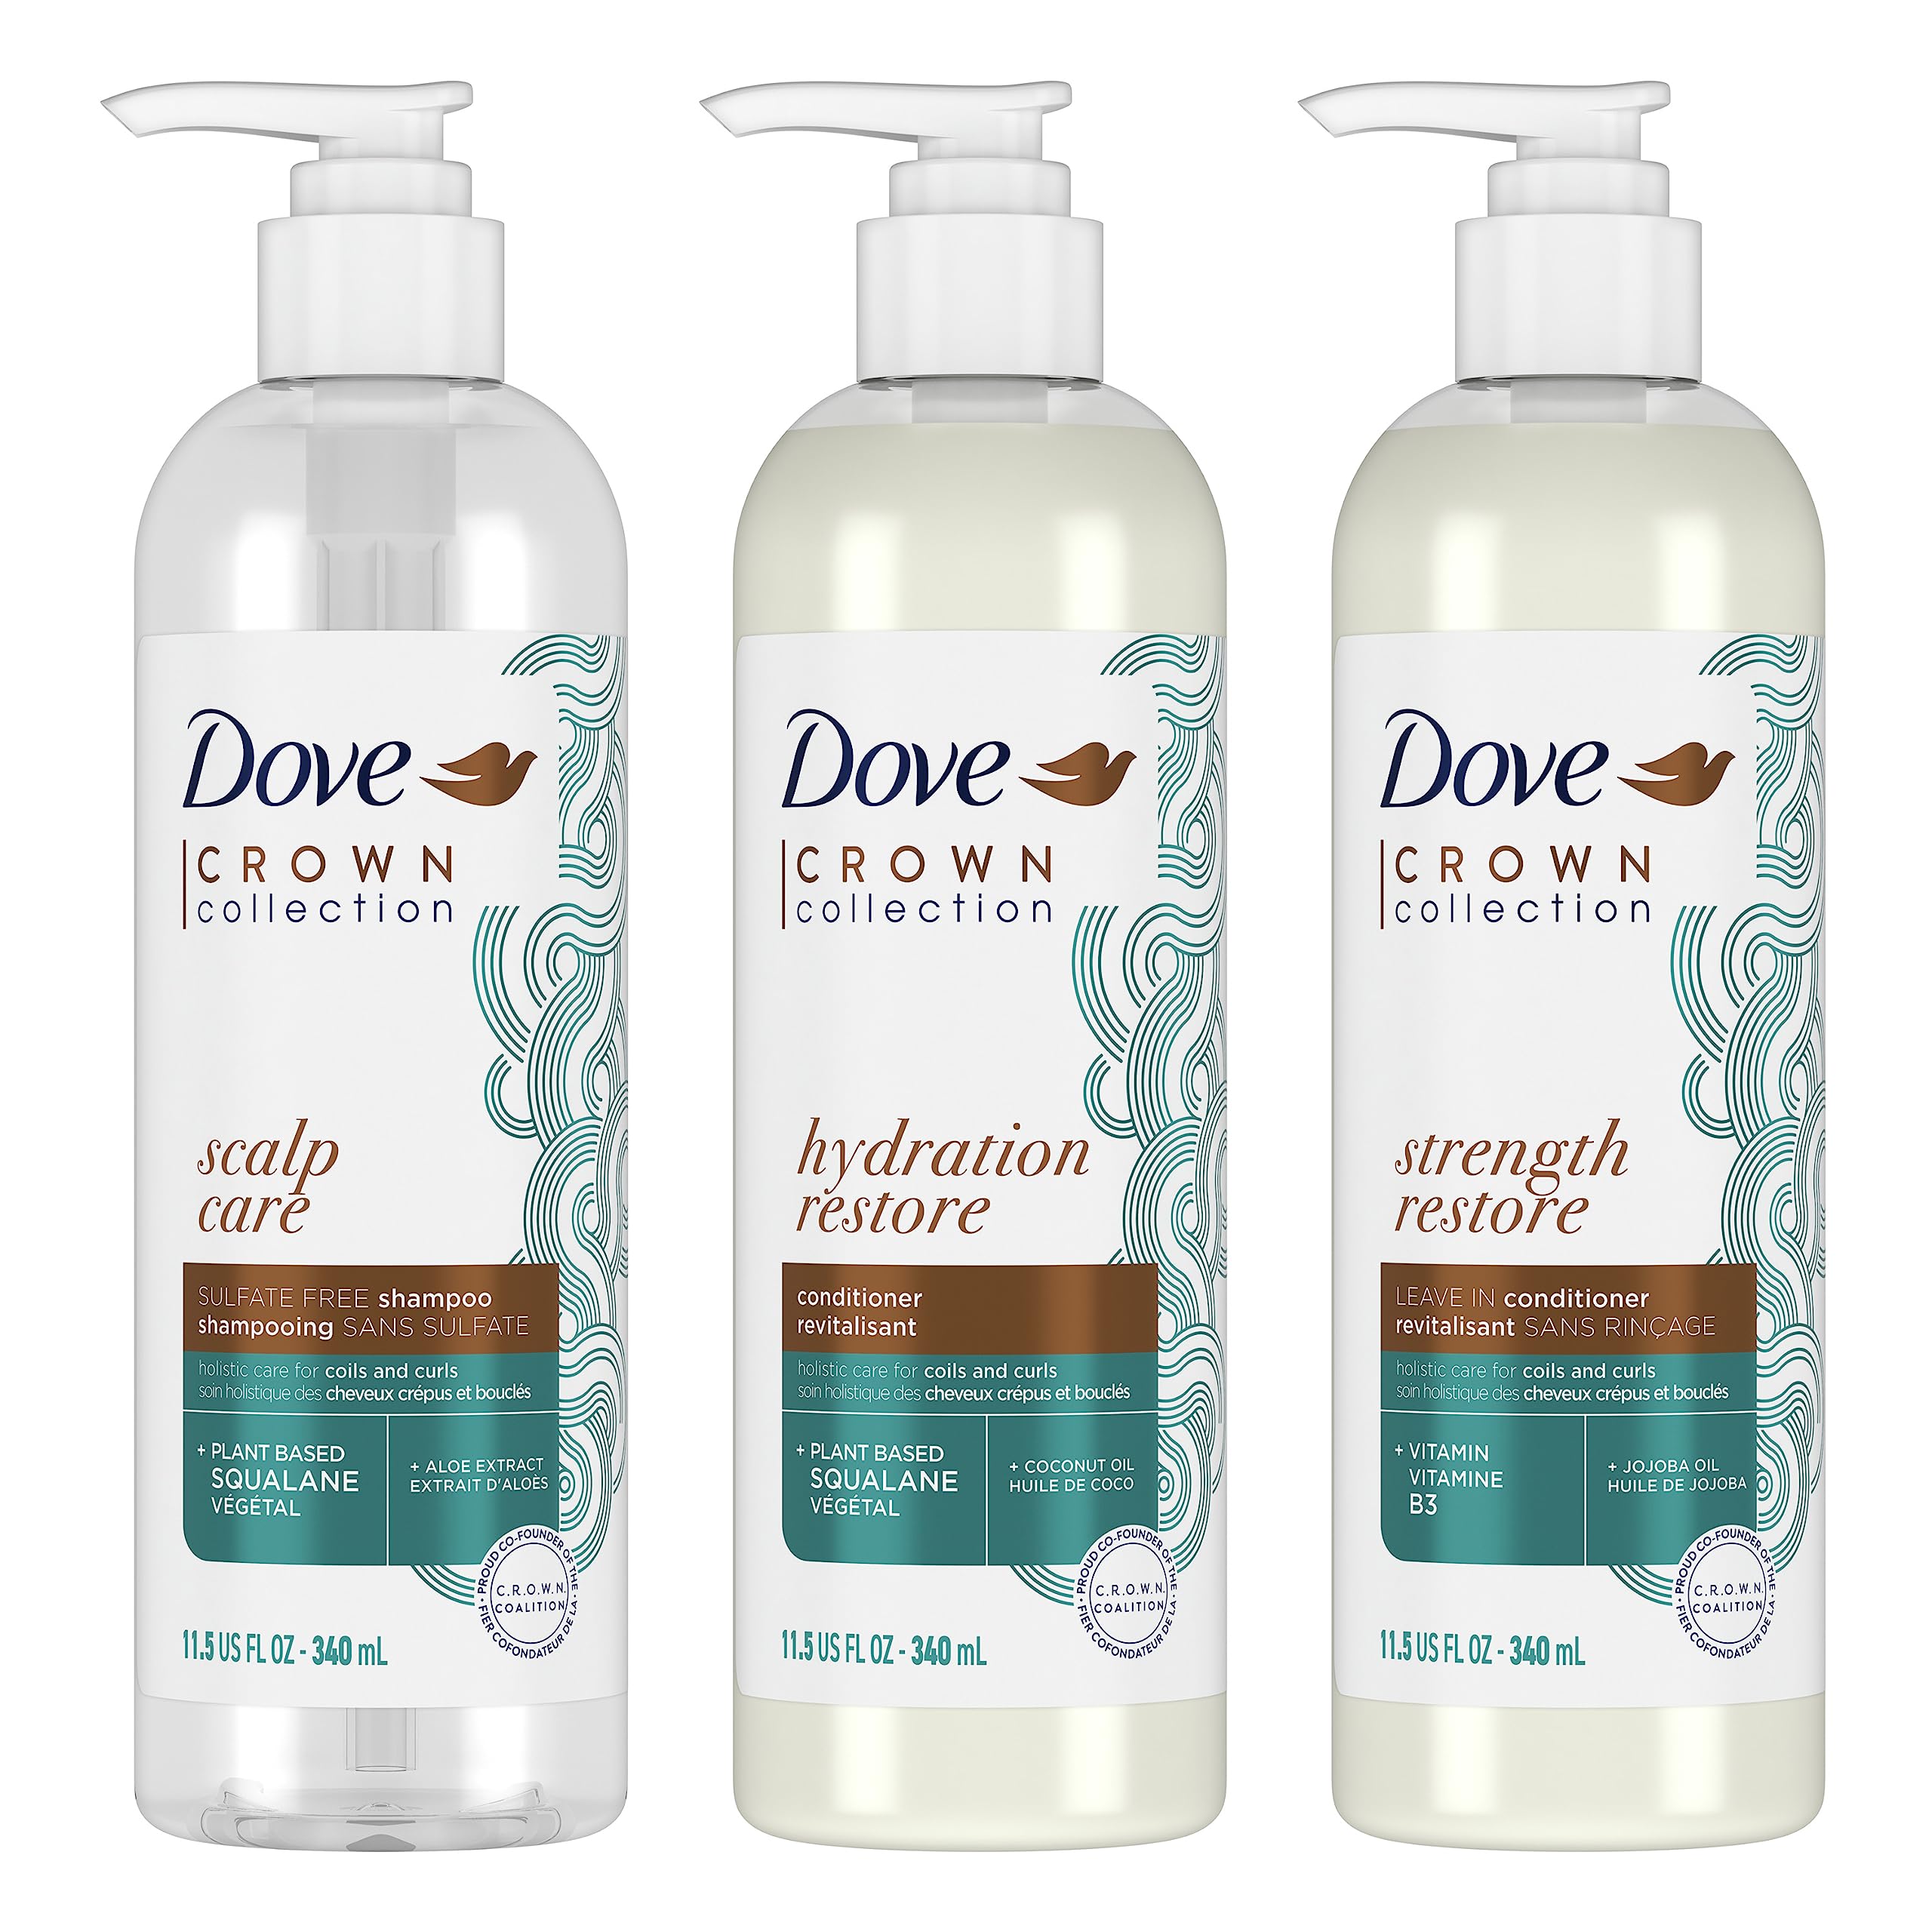 Dove Amplified Textures Shampoo, Conditioner, Leave-In Conditioner with Coconut Milk, Aloe, and Jojoba 3 Count for Coils, Curls and Waves and Moisture Amplifying Hair Care Blend 11.5 Ounce (Pack of 3)